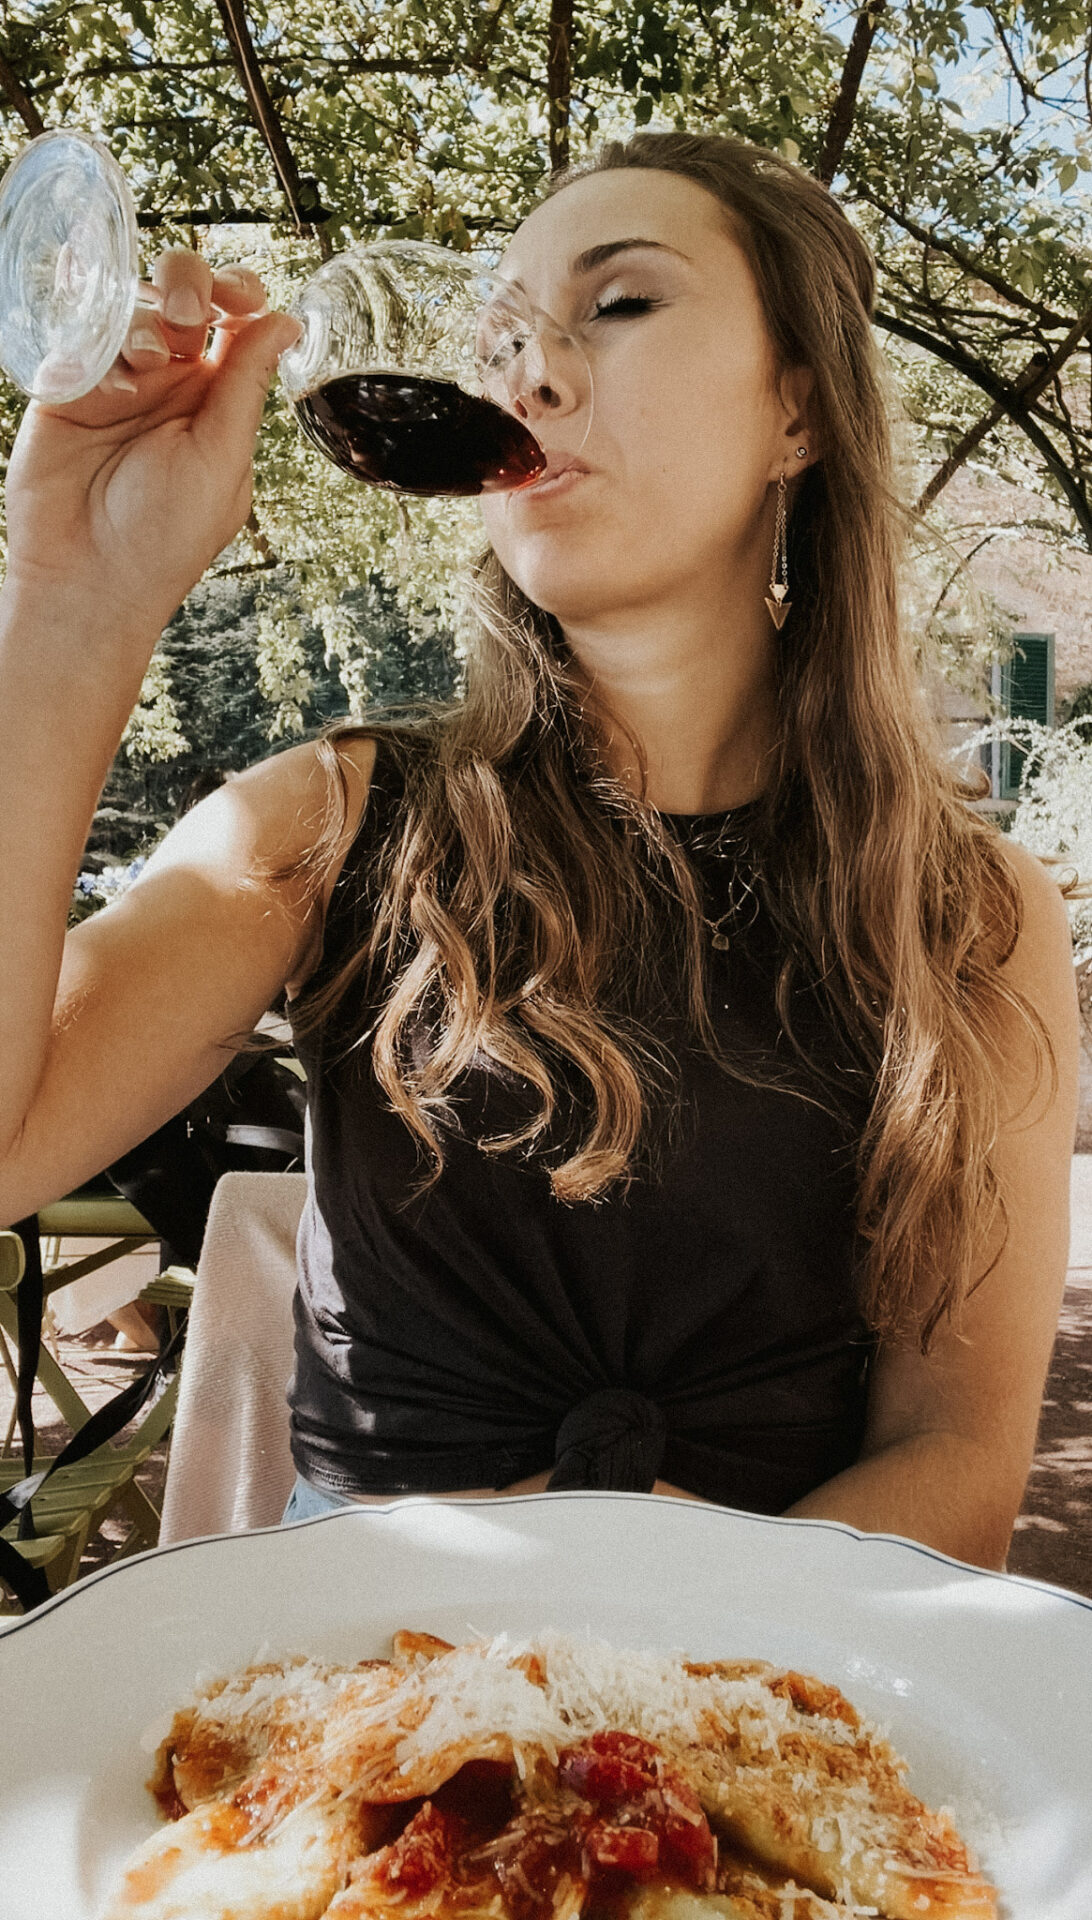 Paige Enjoying a Glass of Red Wine with Pasta